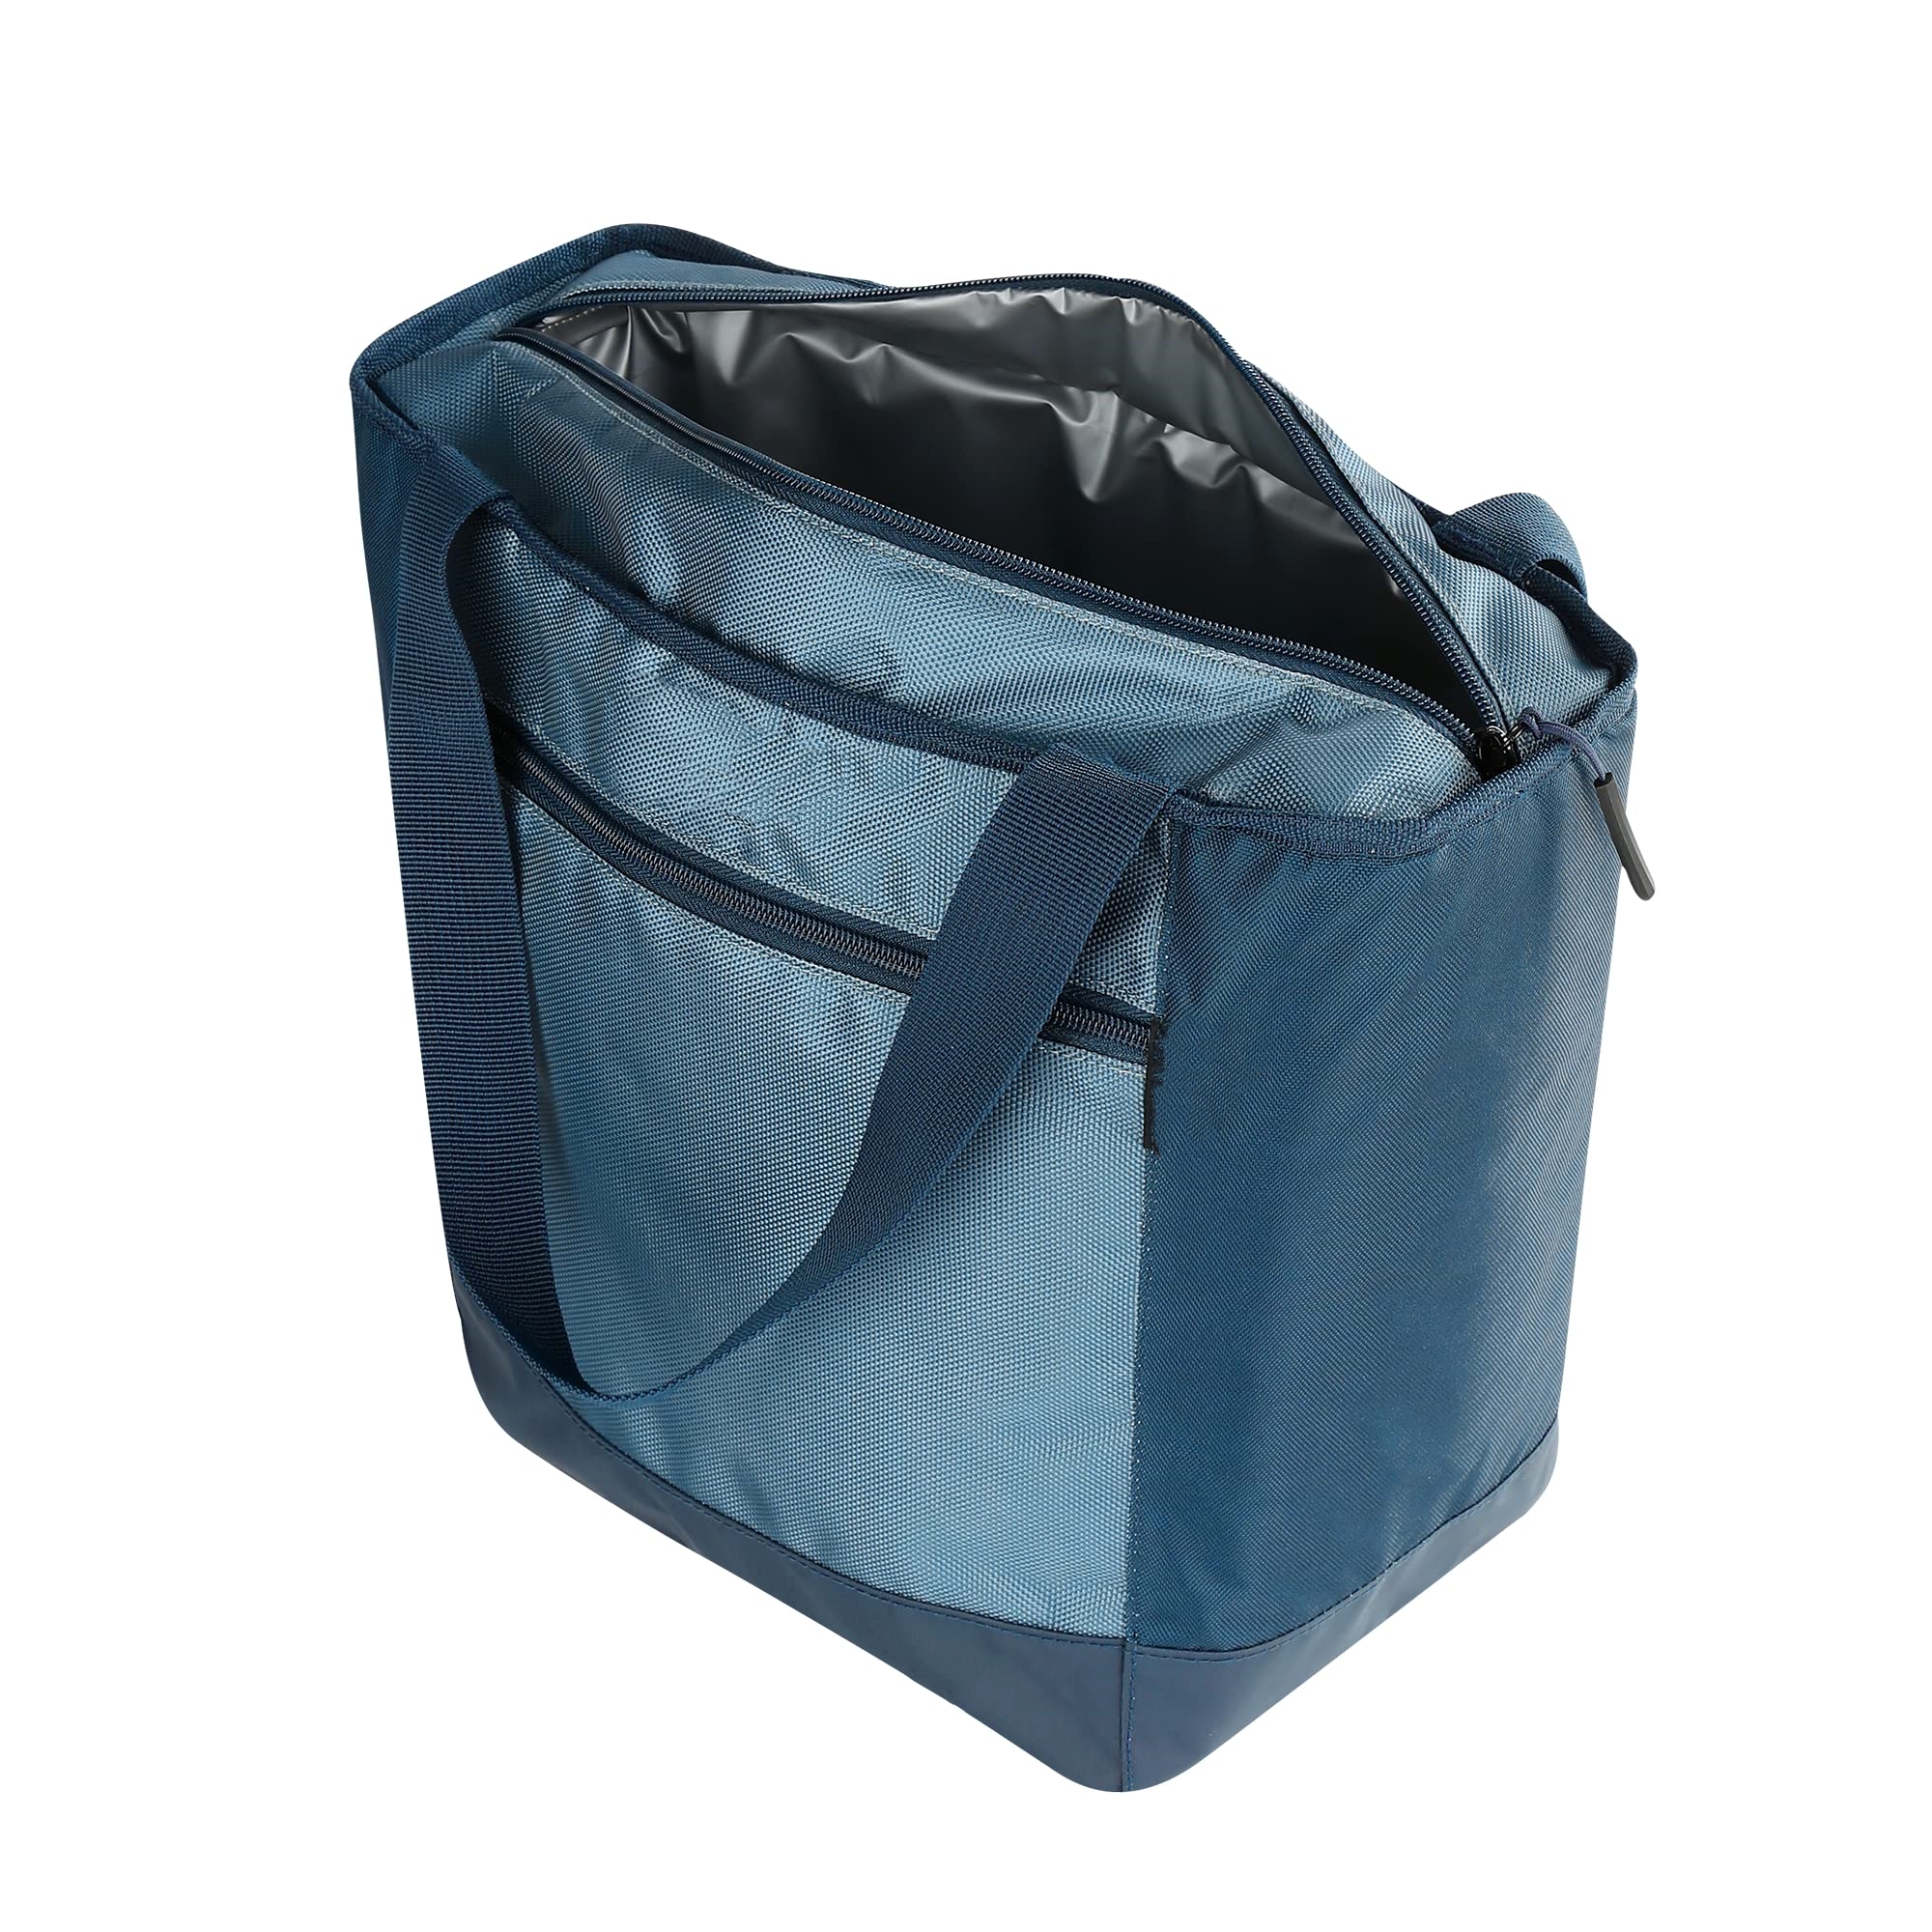 16 Cans Tote Cooler Bag Product Details